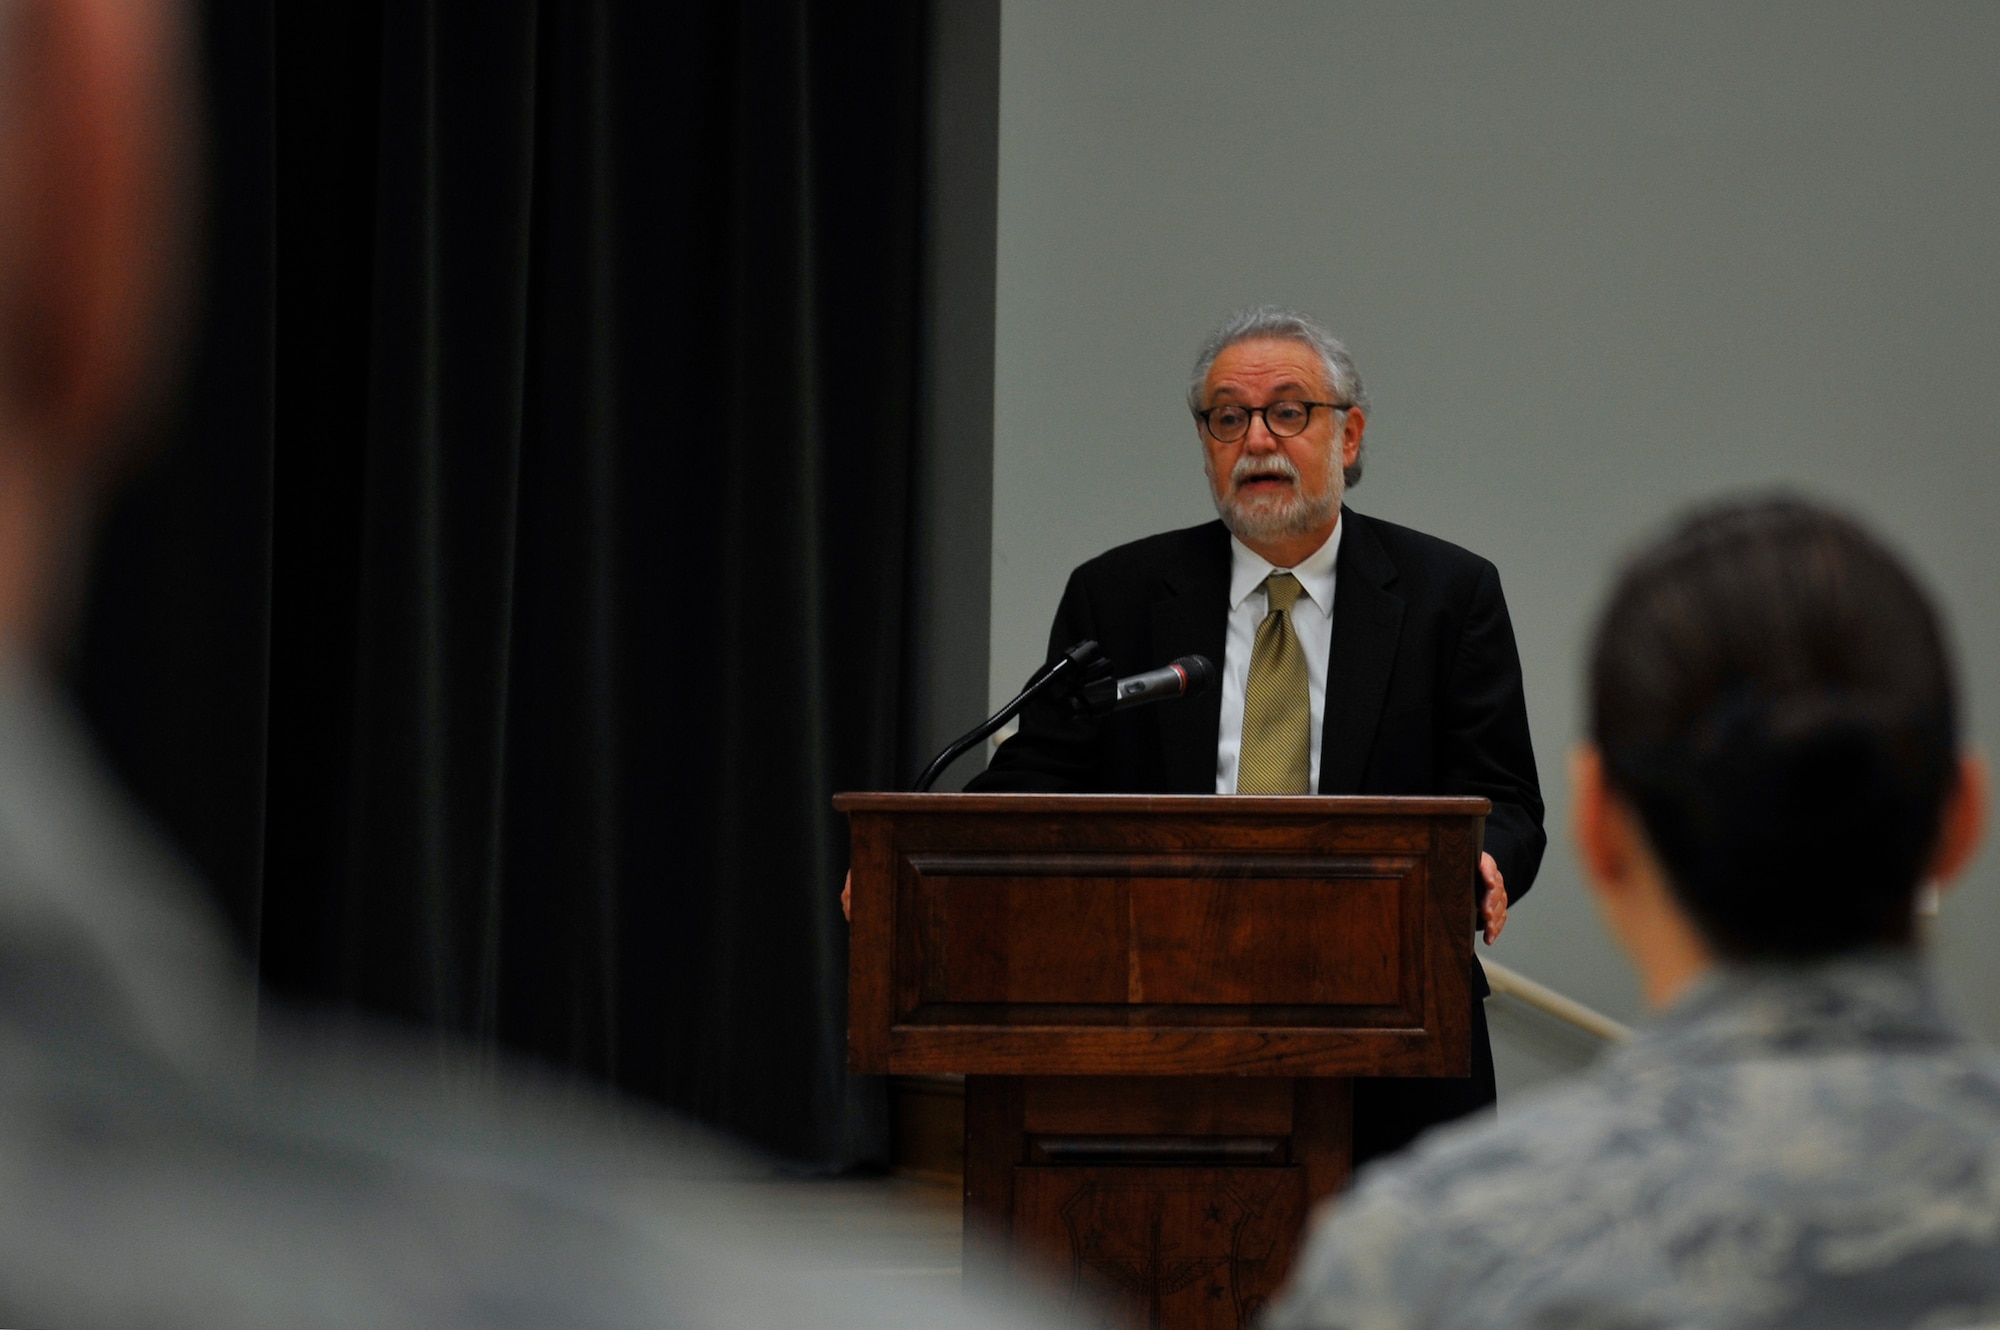 Garrick Feldman, publisher of the Combat Airlifter base newspaper, shares his mother's story of being a Holocaust survivor May 5, 2016, at Little Rock Air Force Base. Feldman spoke on his mother’s behalf in hopes that she and those who survived are never forgotten. (U.S. Air Force photo by Kevin E. Sommer Giron)